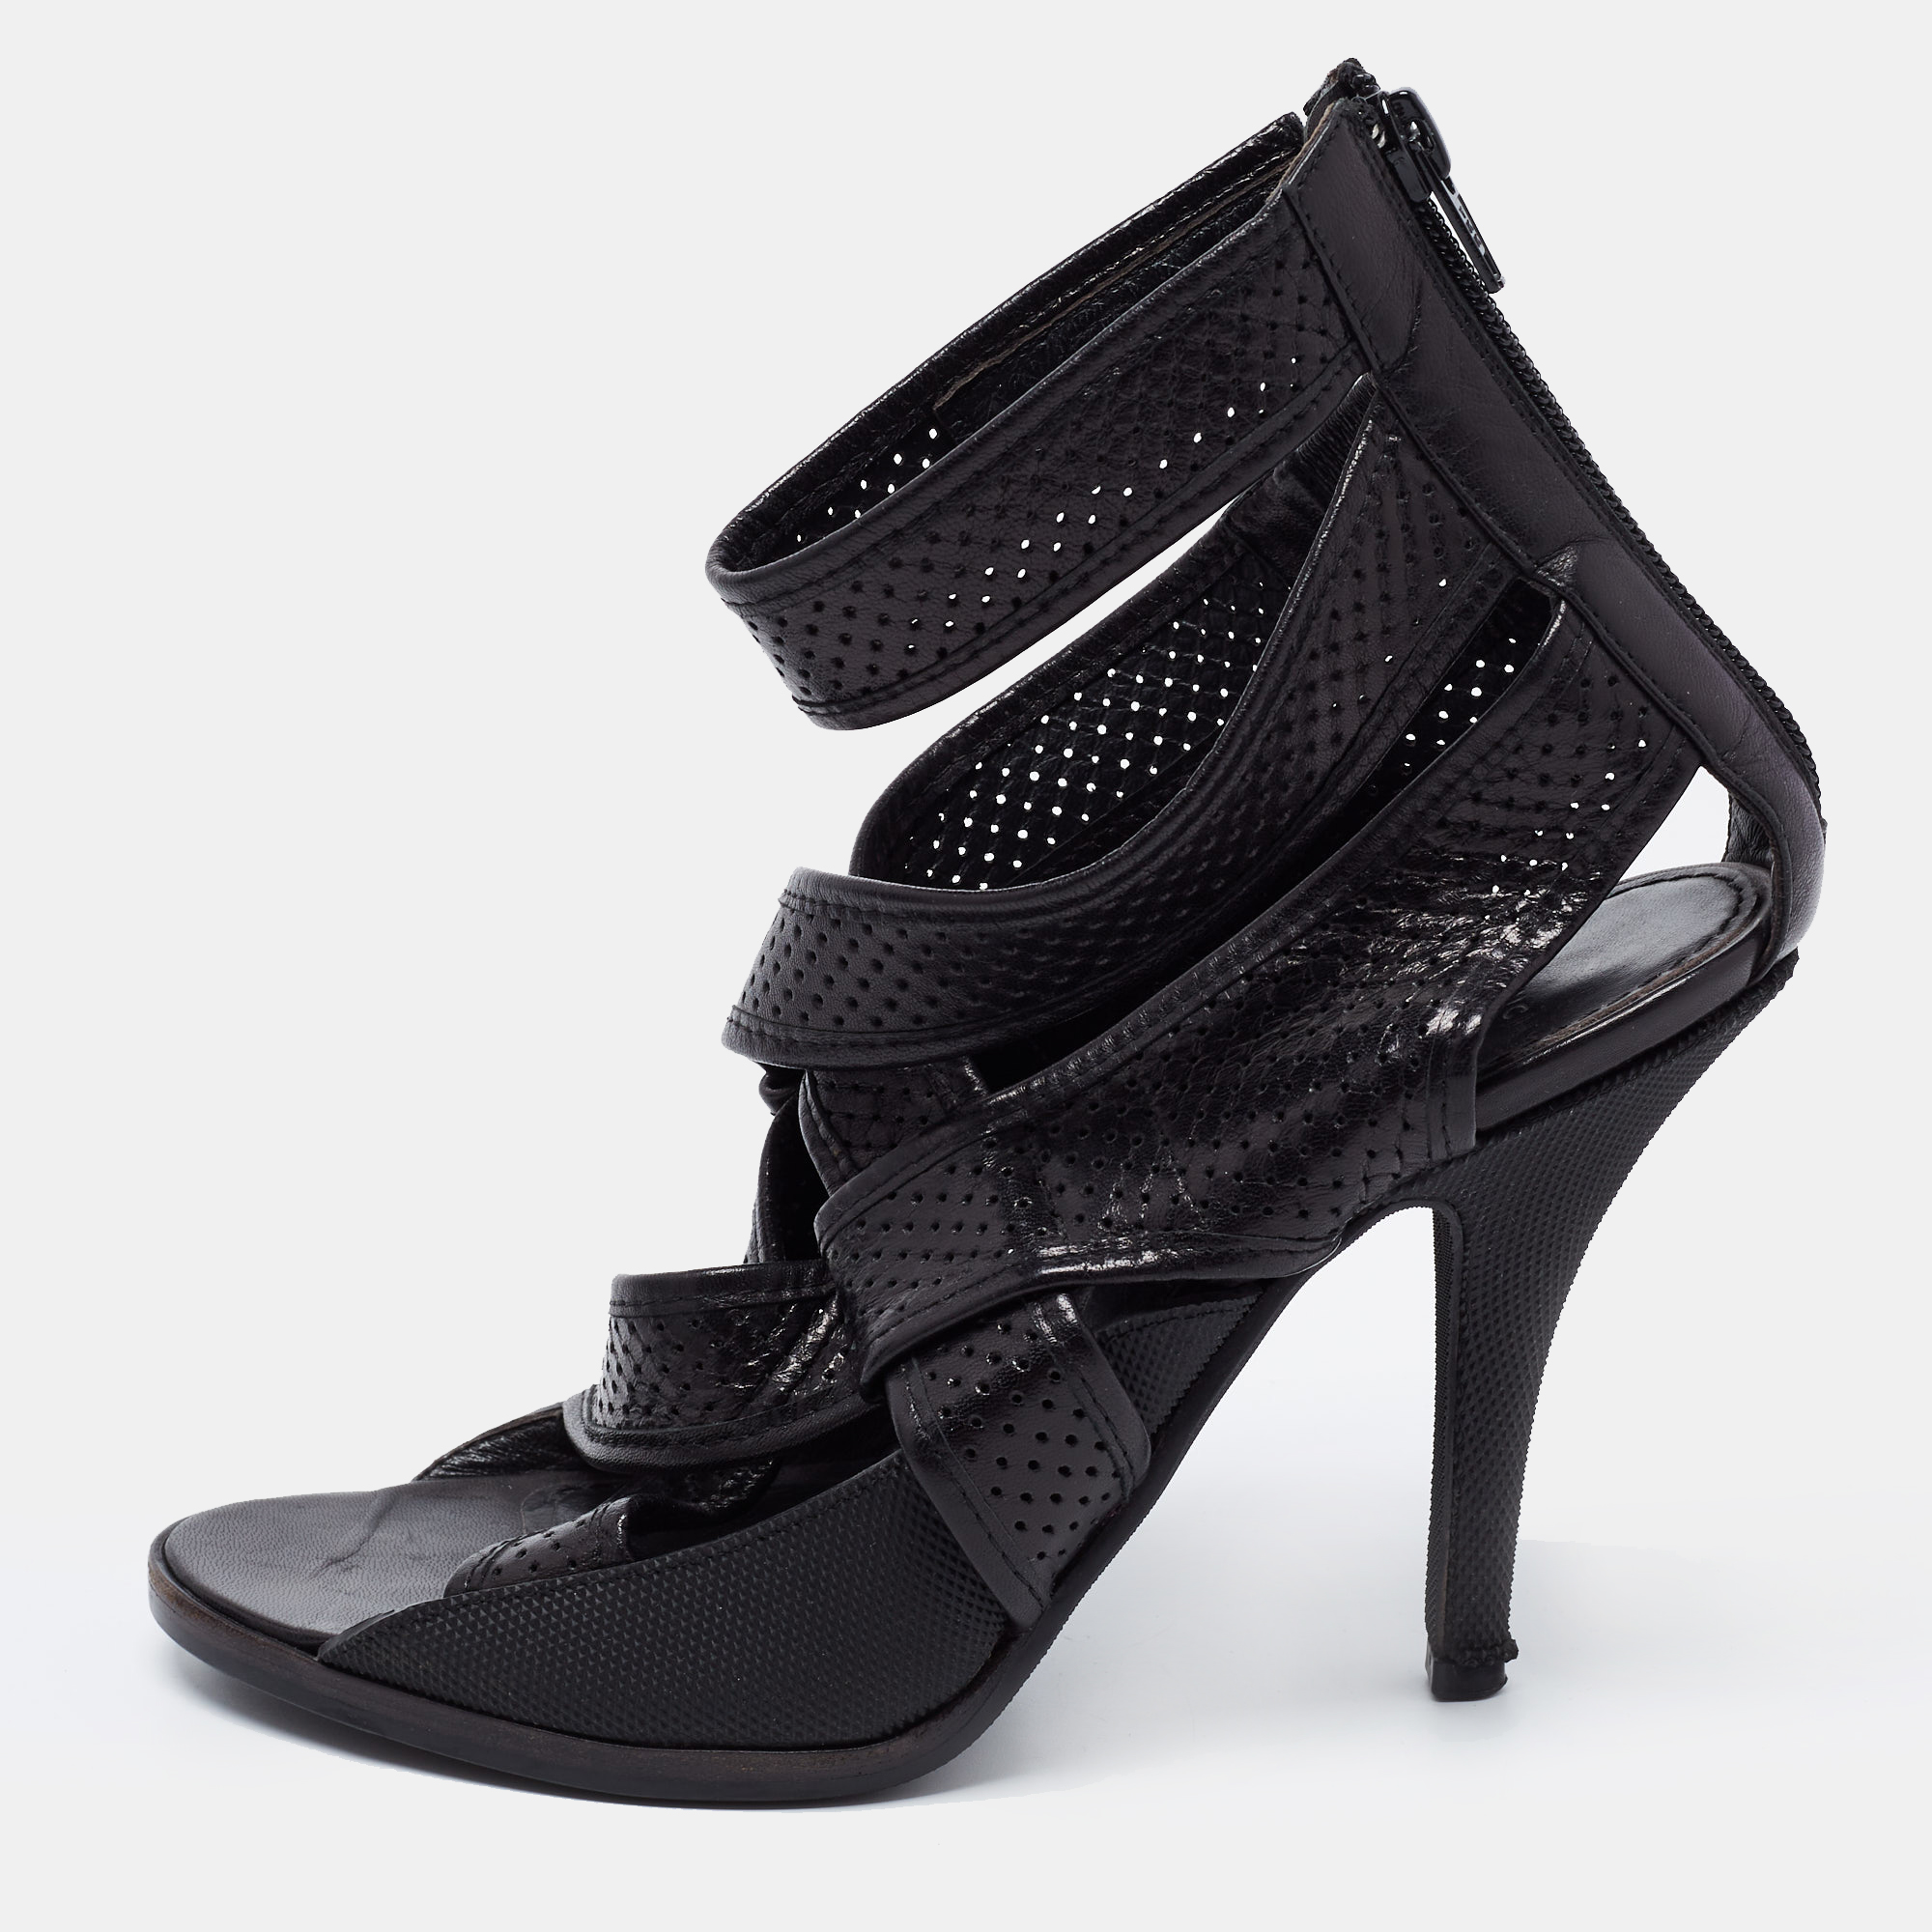 Givenchy Black Leather Ankle-Strap Sandals Size 38